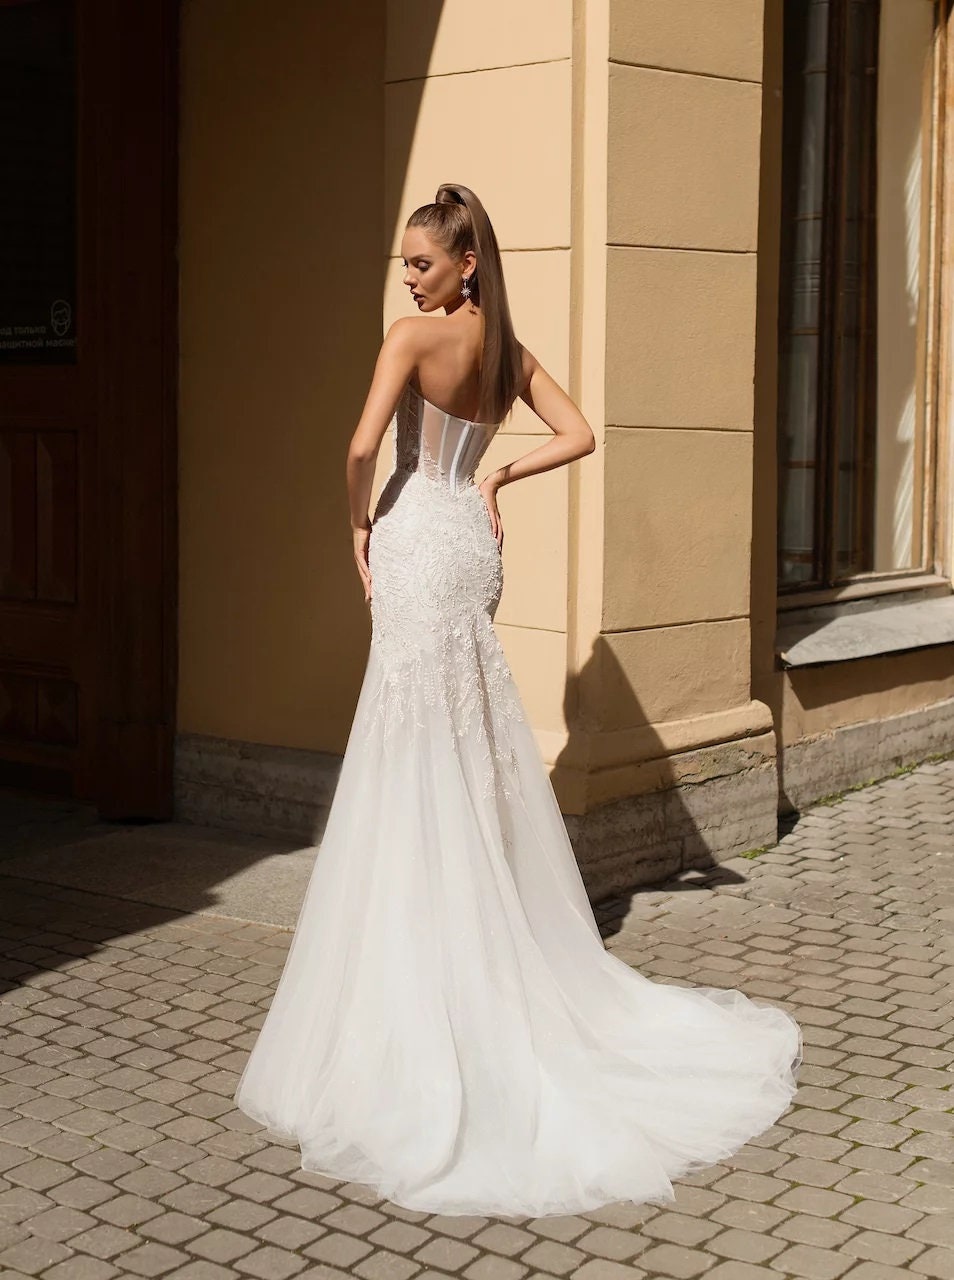 Sexy Sparkling Sleeveless Strapless Fit and Flare Wedding Dress Bridal Gown Sweetheart Neckline Bustier Corset Detachable Balloon Sleeves